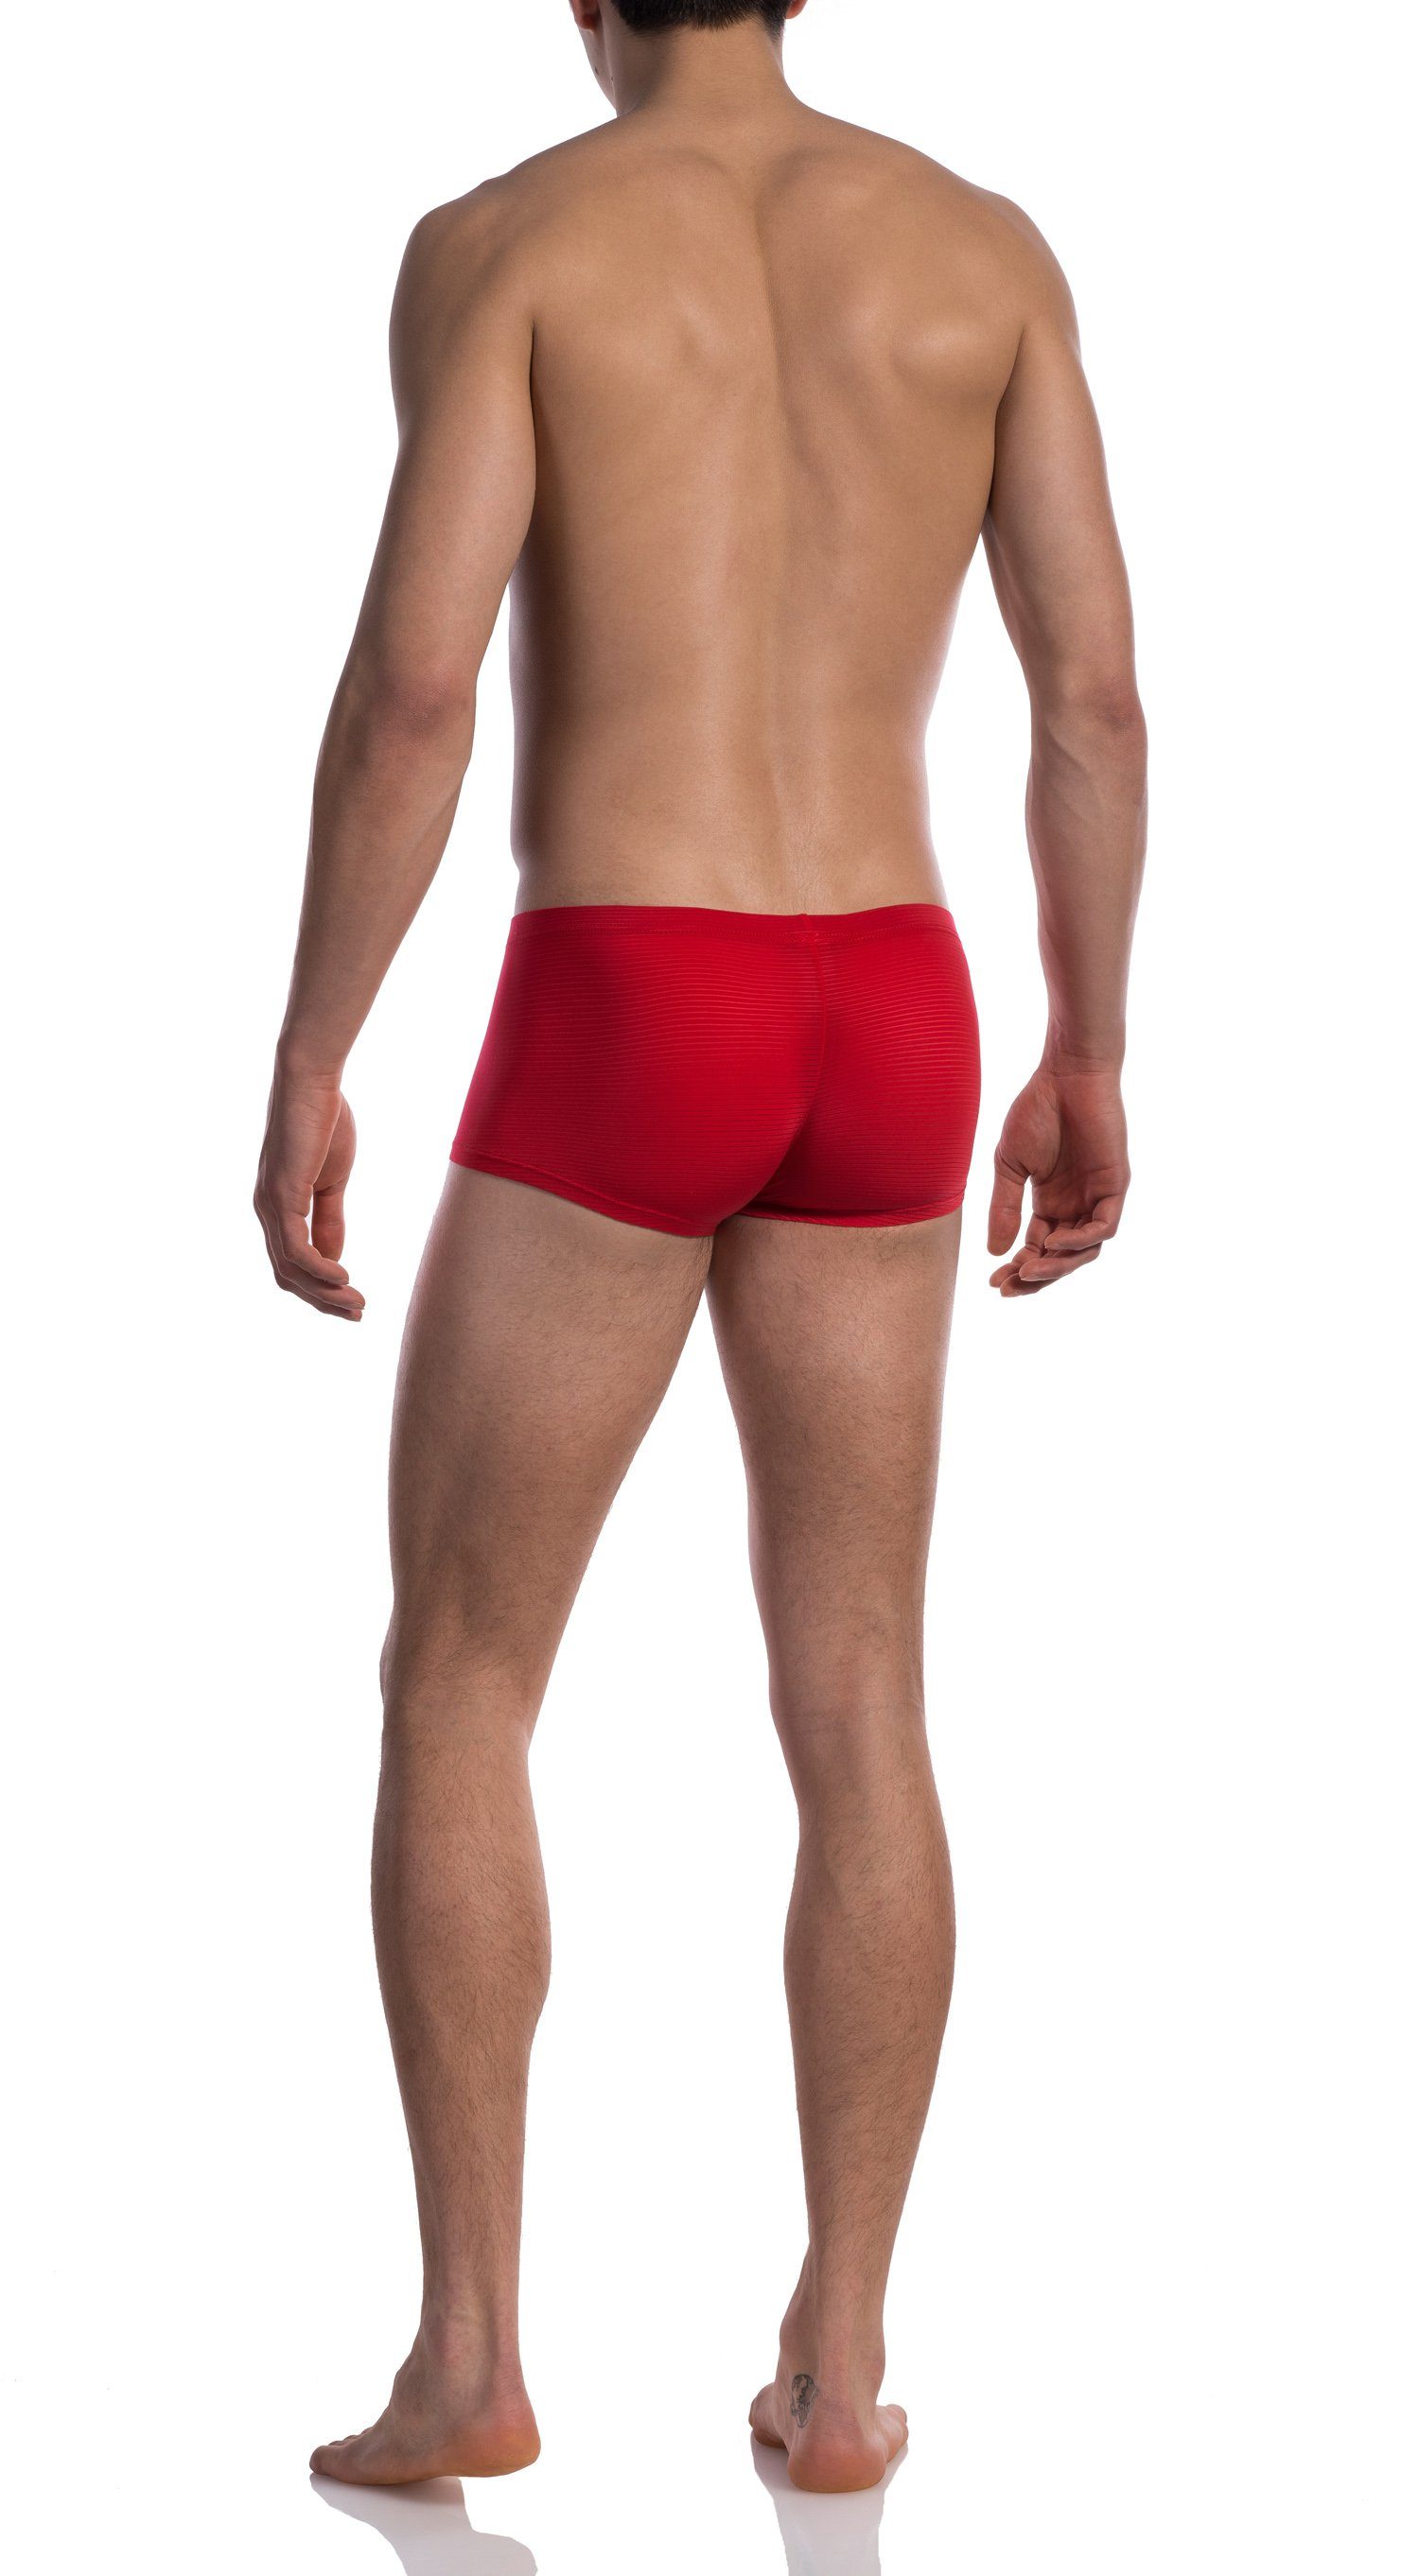 Olaf Benz Boxershorts Minipants Doppelpack 1201 2er-Pack) Rot RED (Packung